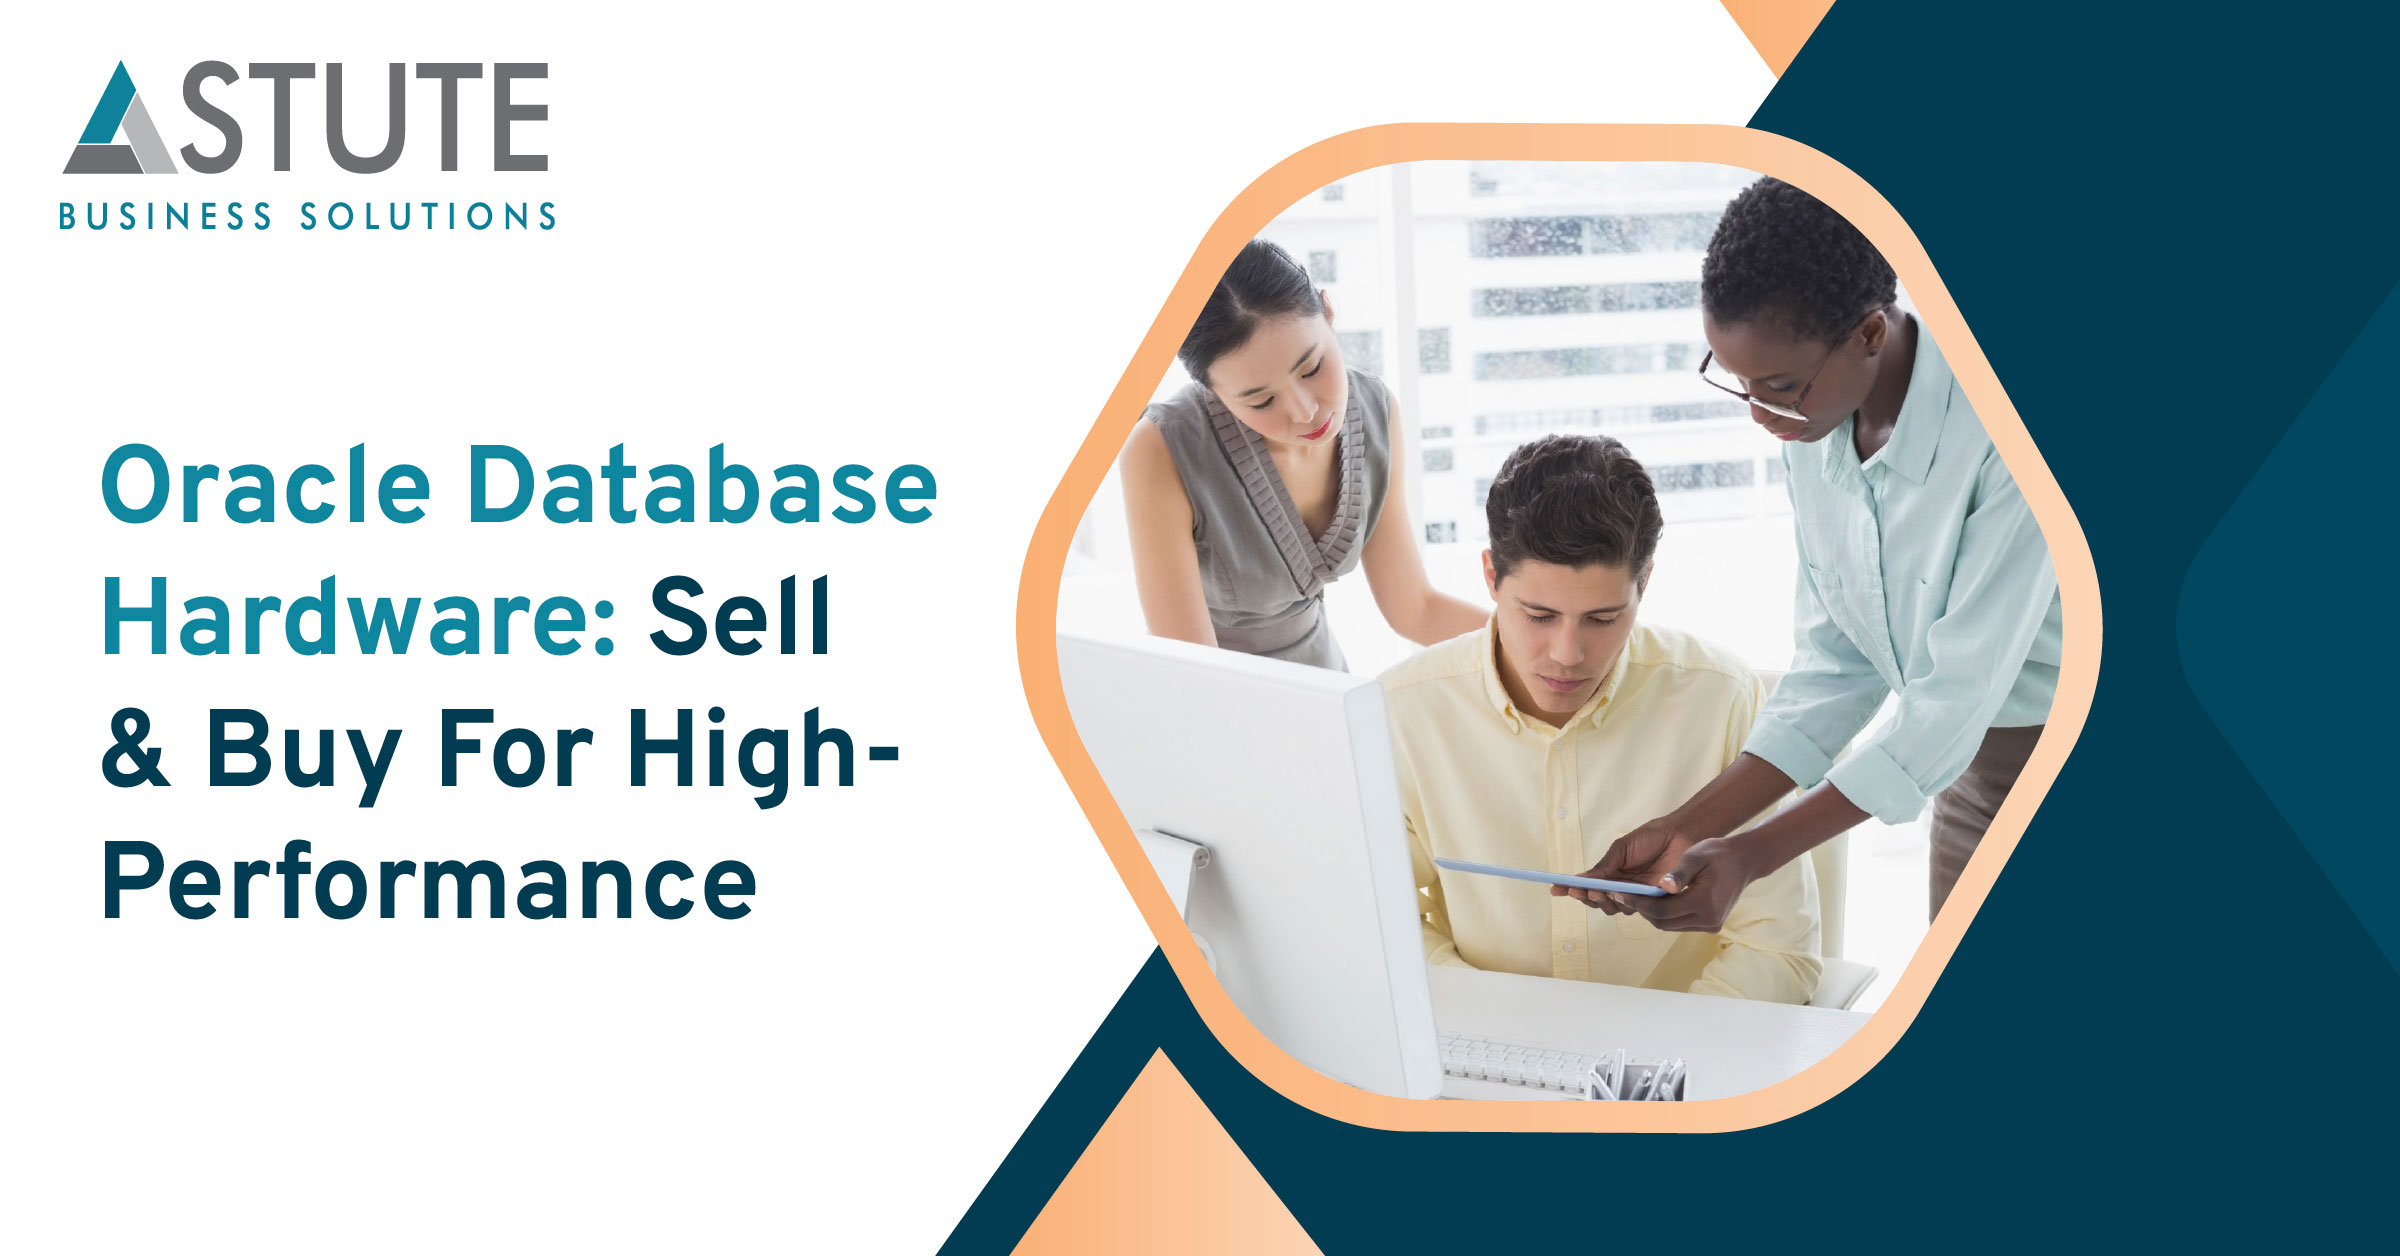 Oracle Database Hardware: Sell & Buy For High-Performance